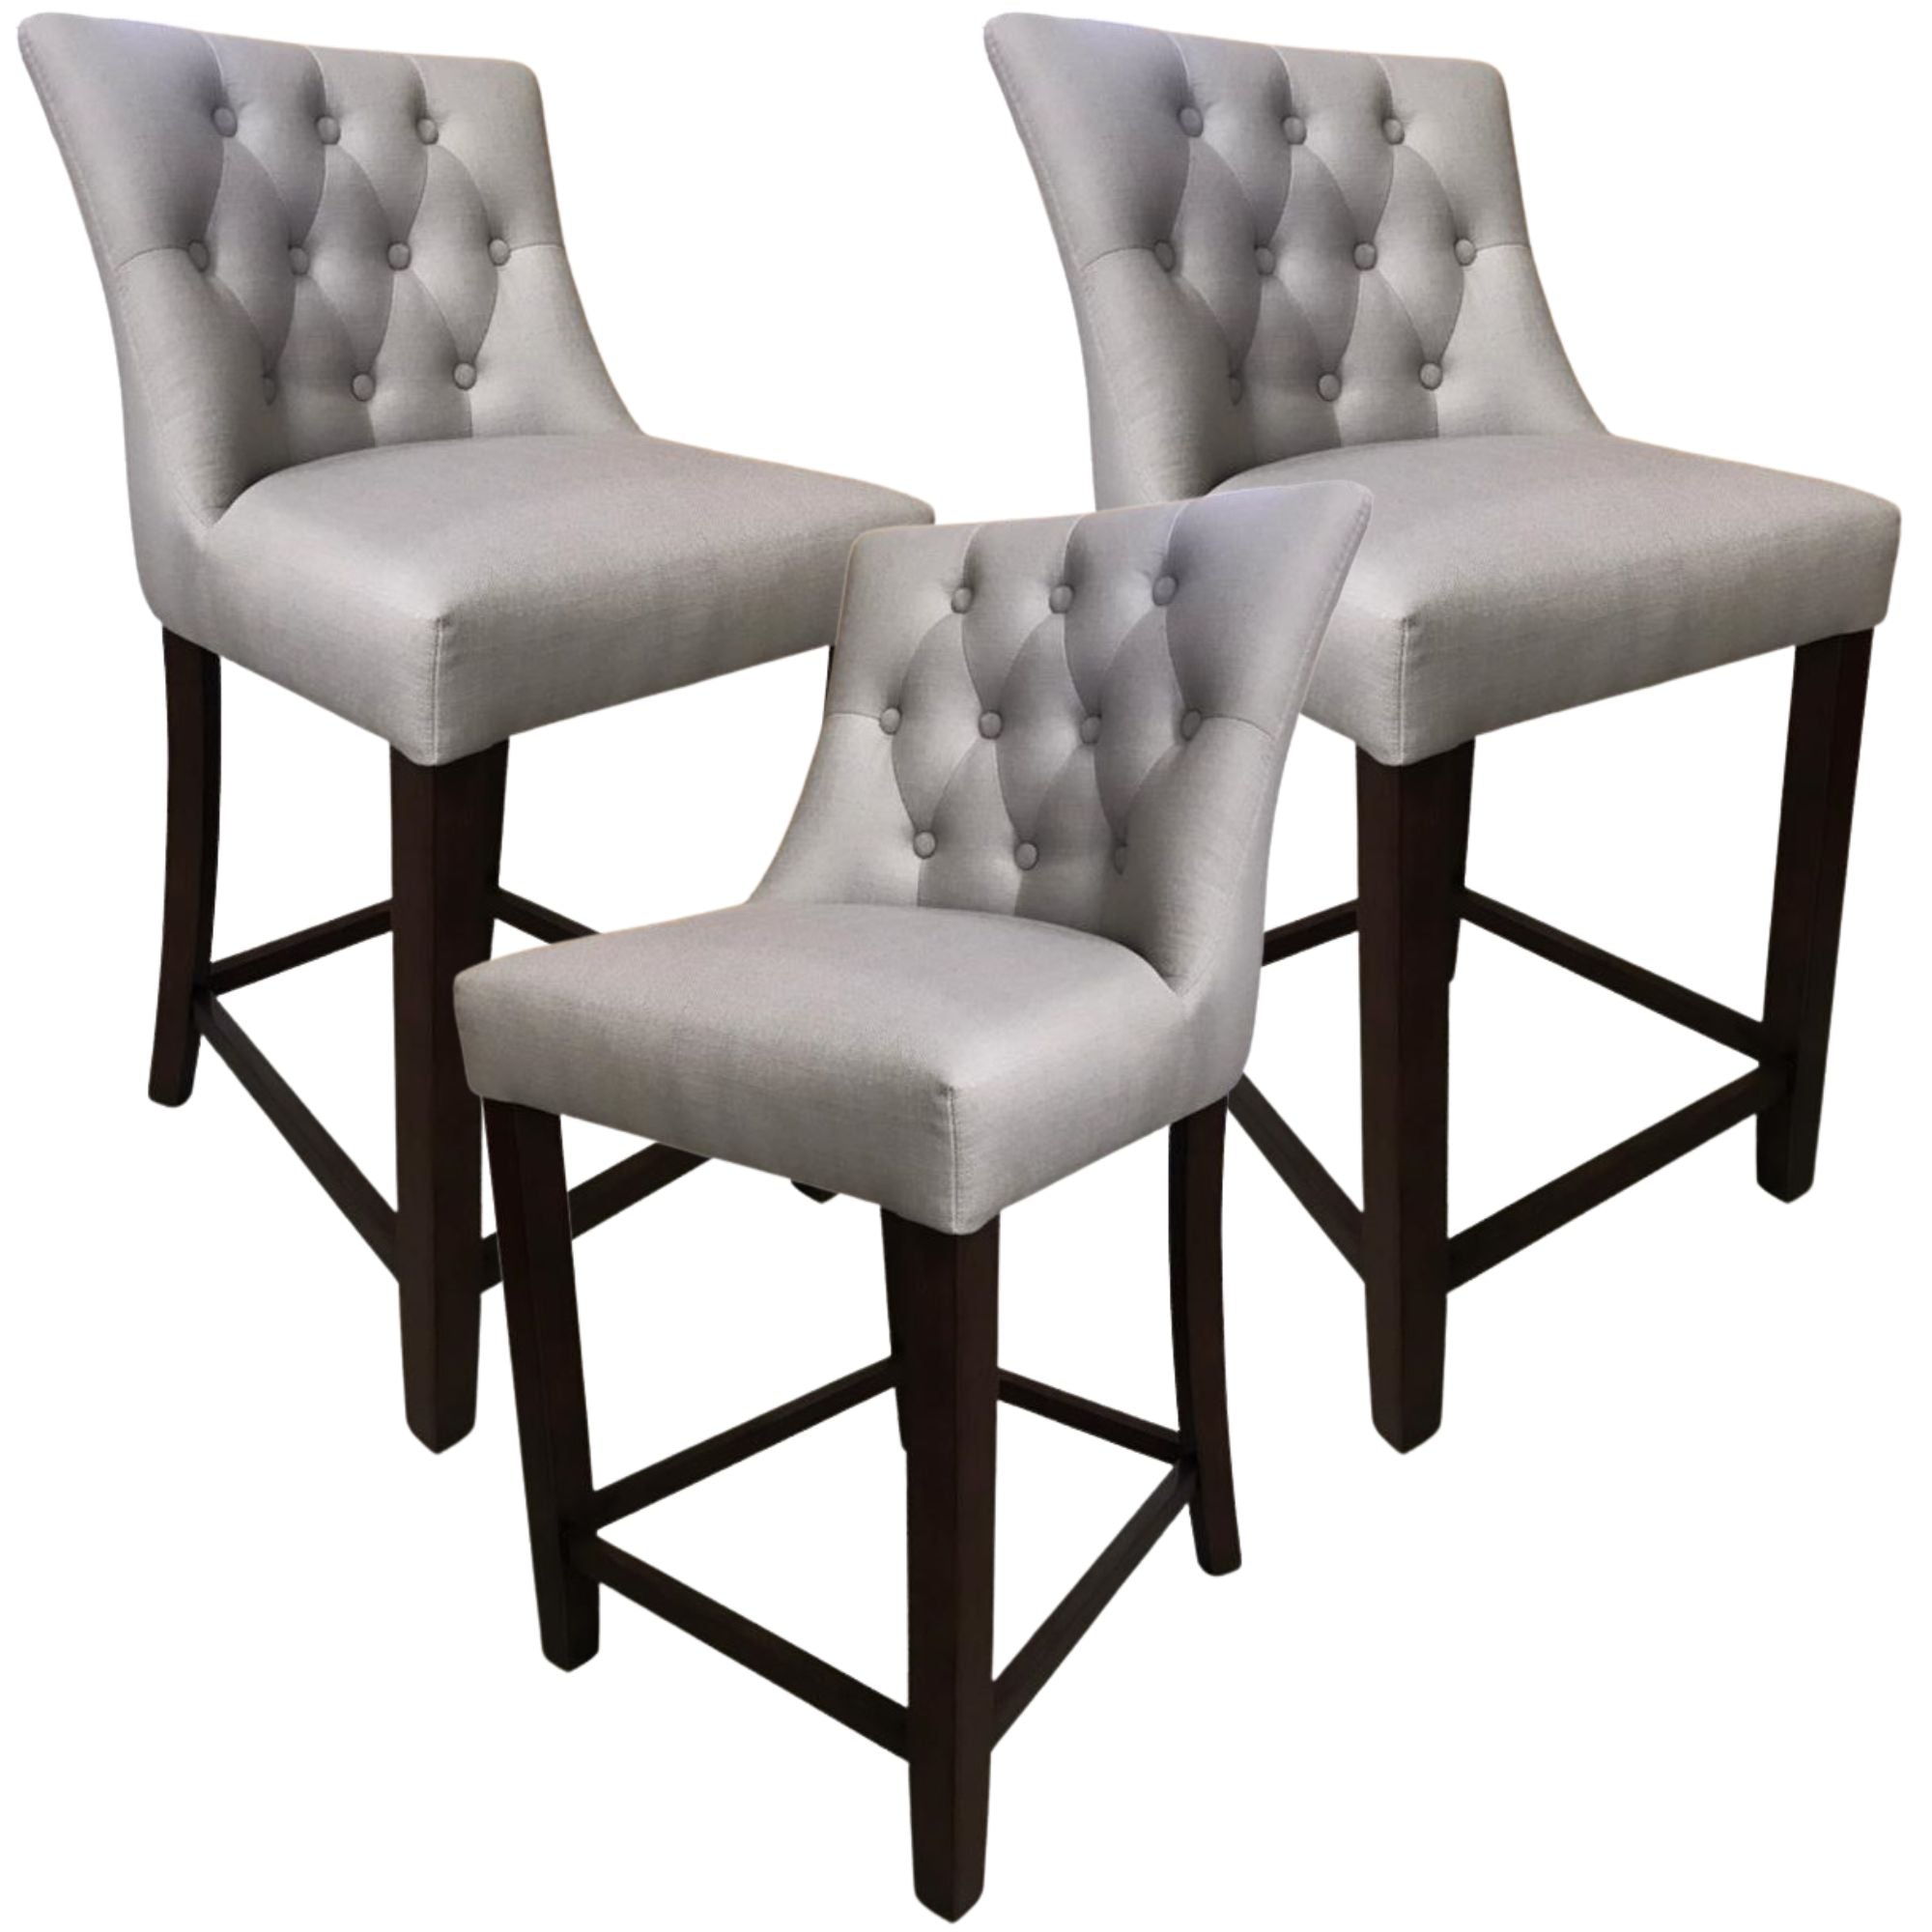 florence-3pc-high-fabric-dining-chair-bar-stool-french-provincial-solid-timber